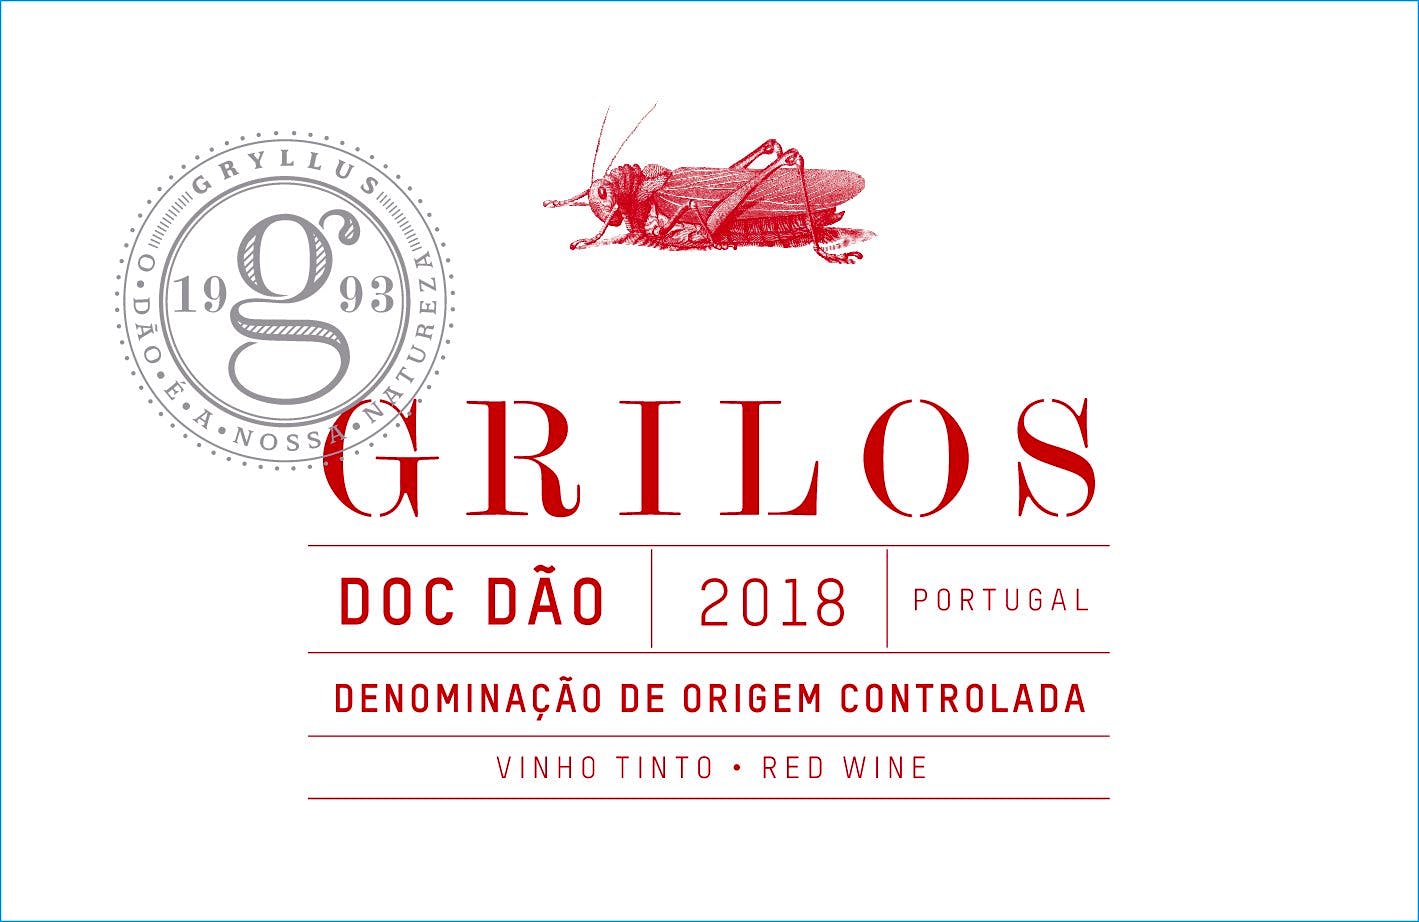 Label for Global Wines